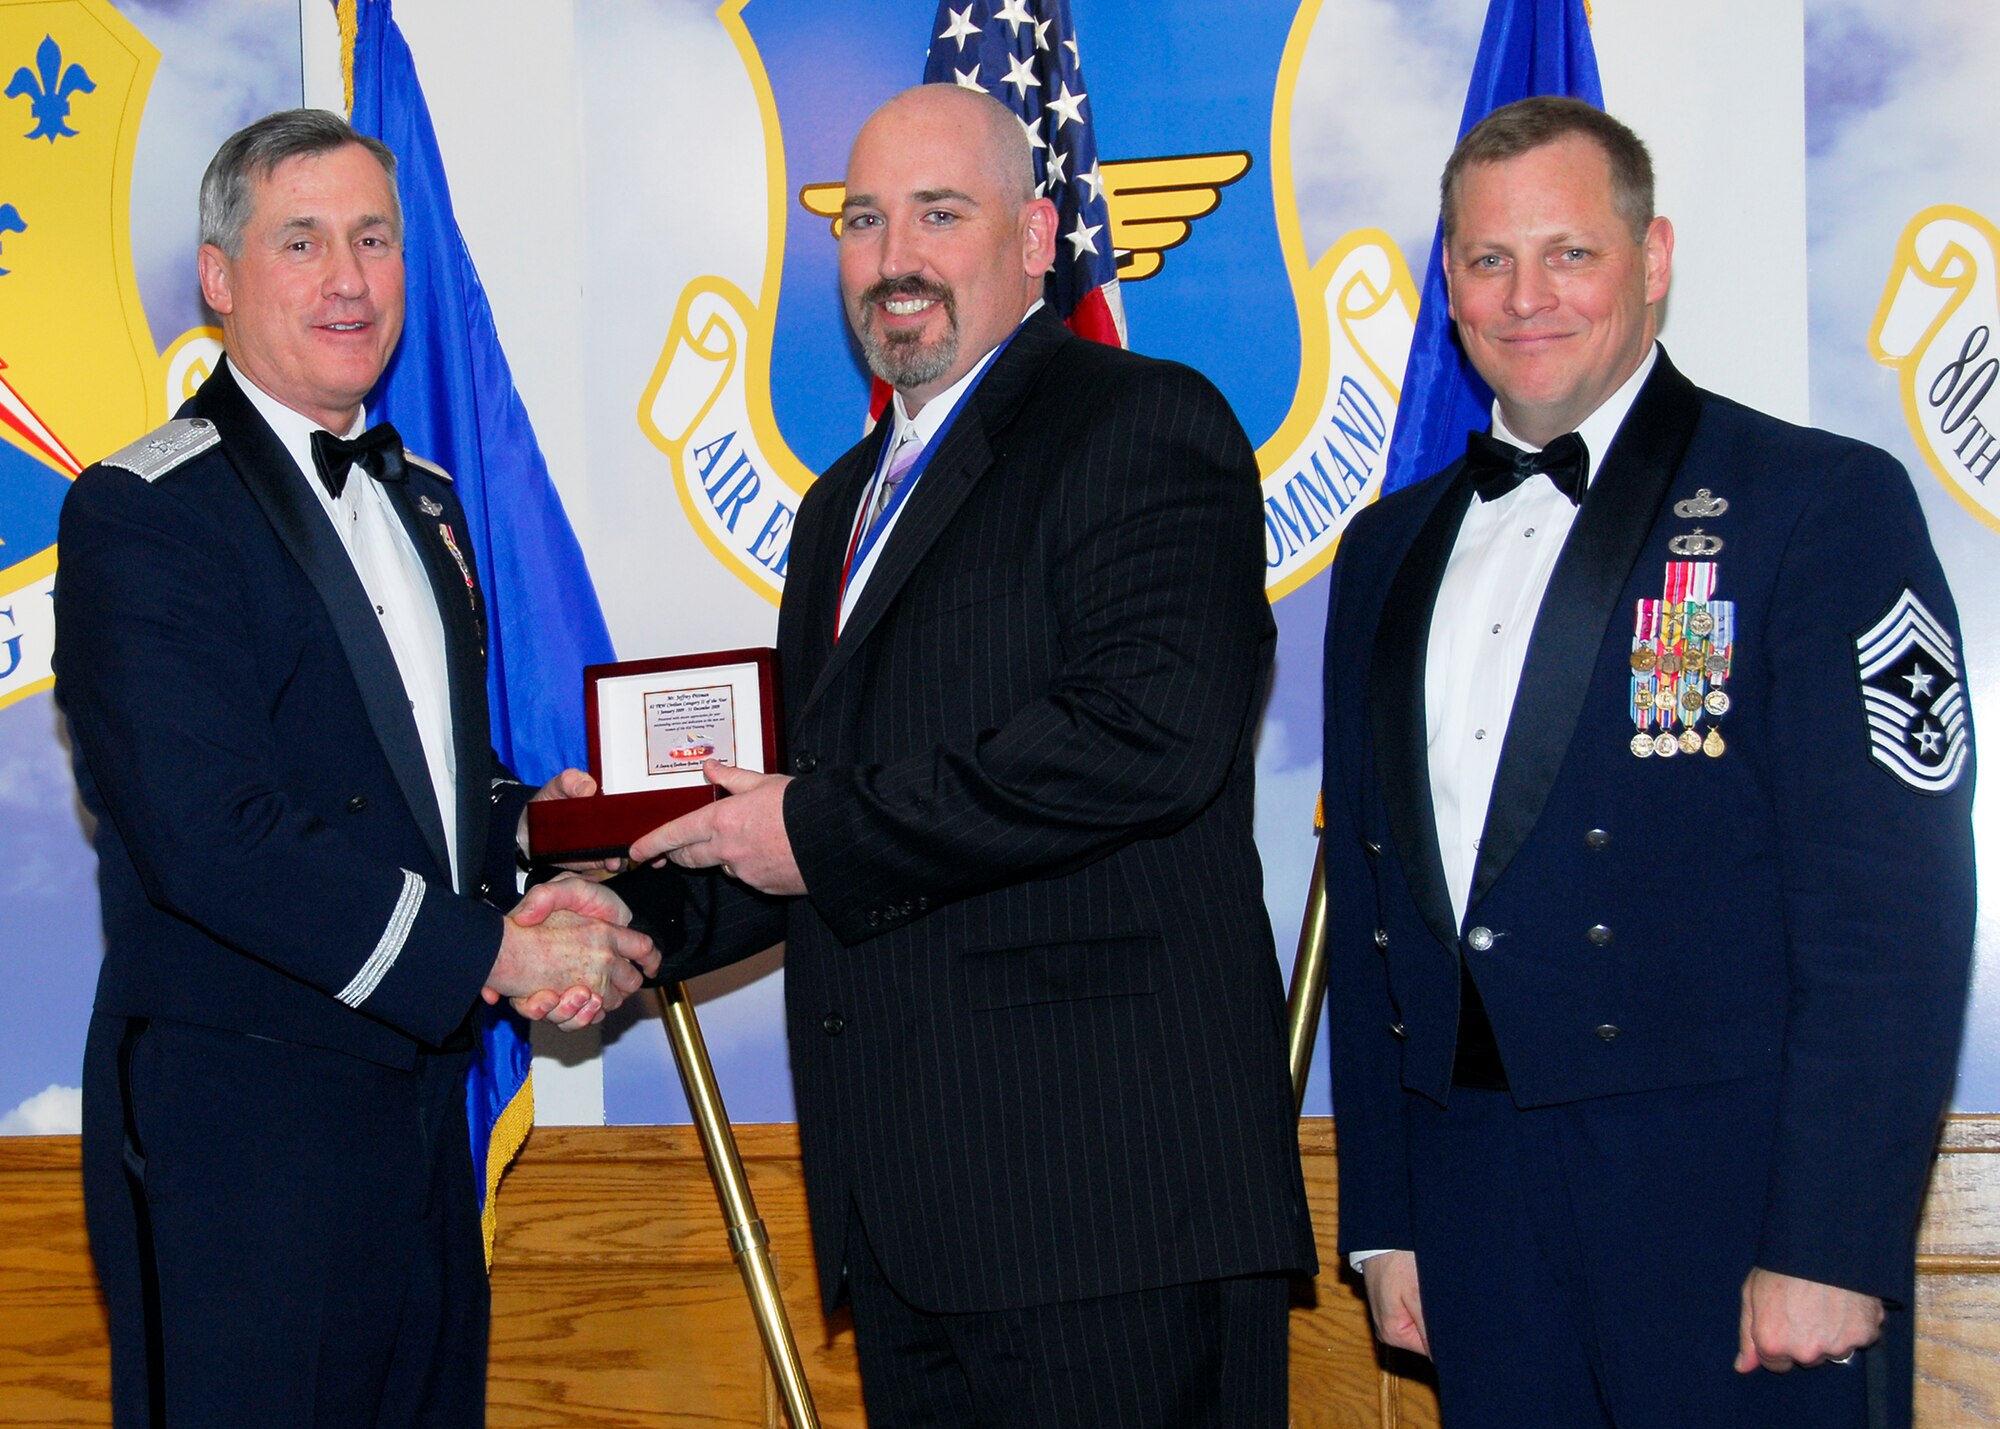 Brig. Gen. O.G. Mannon, 82nd Training Wing commander, presents Jeffrey Pittman, 361st Training Squadron, with the Civilian Category II of the Year award March 5 during the 2009 82nd TRW Annual Awards banquet. Also pictured is wing Command Chief, Chief Master Sgt. Kenneth Sallinger. (U.S. Air Force photo/Harry Tonemah) 